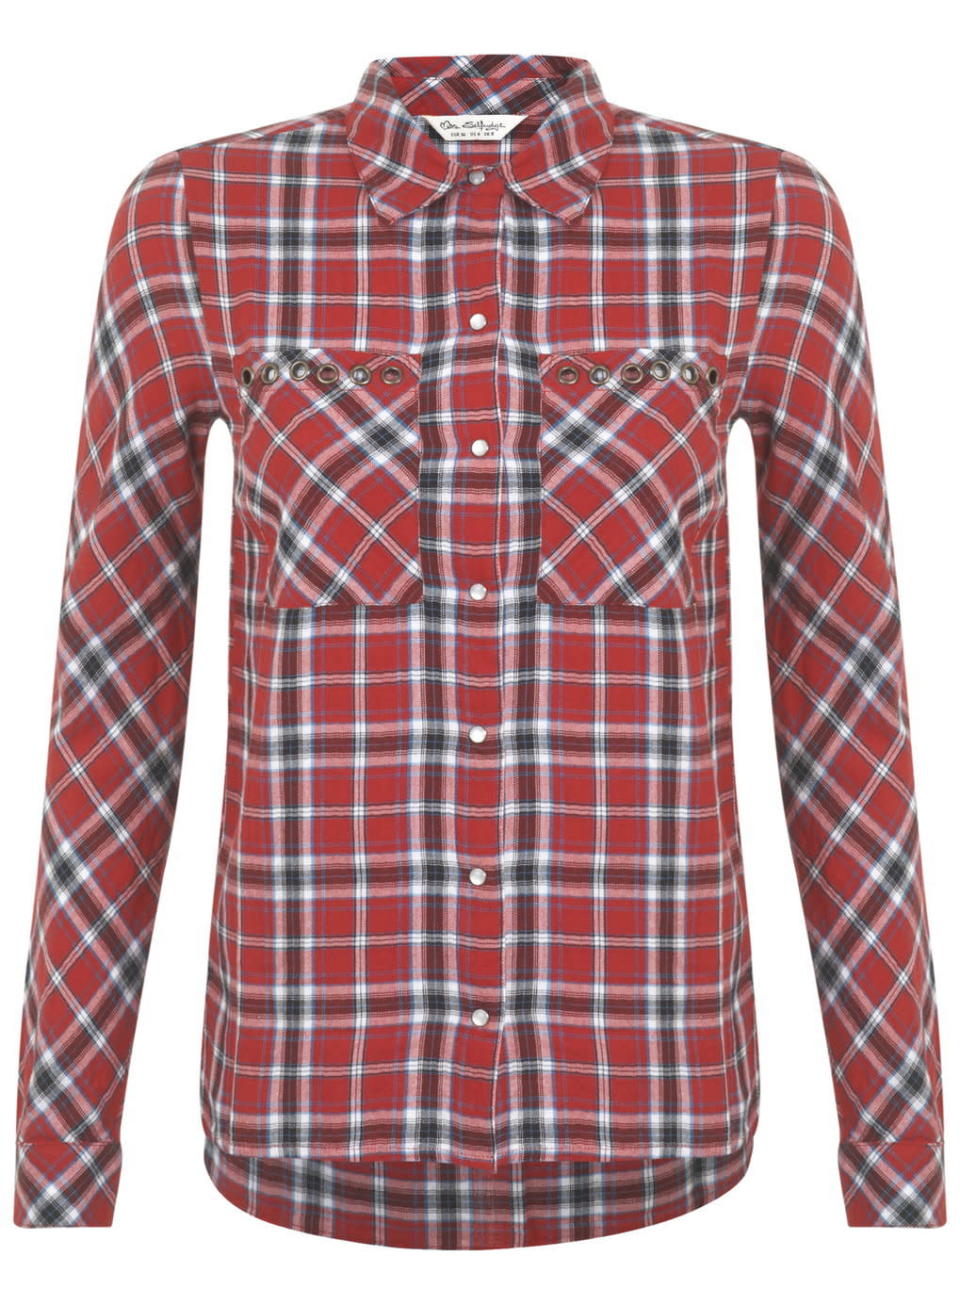 The Checked Shirt